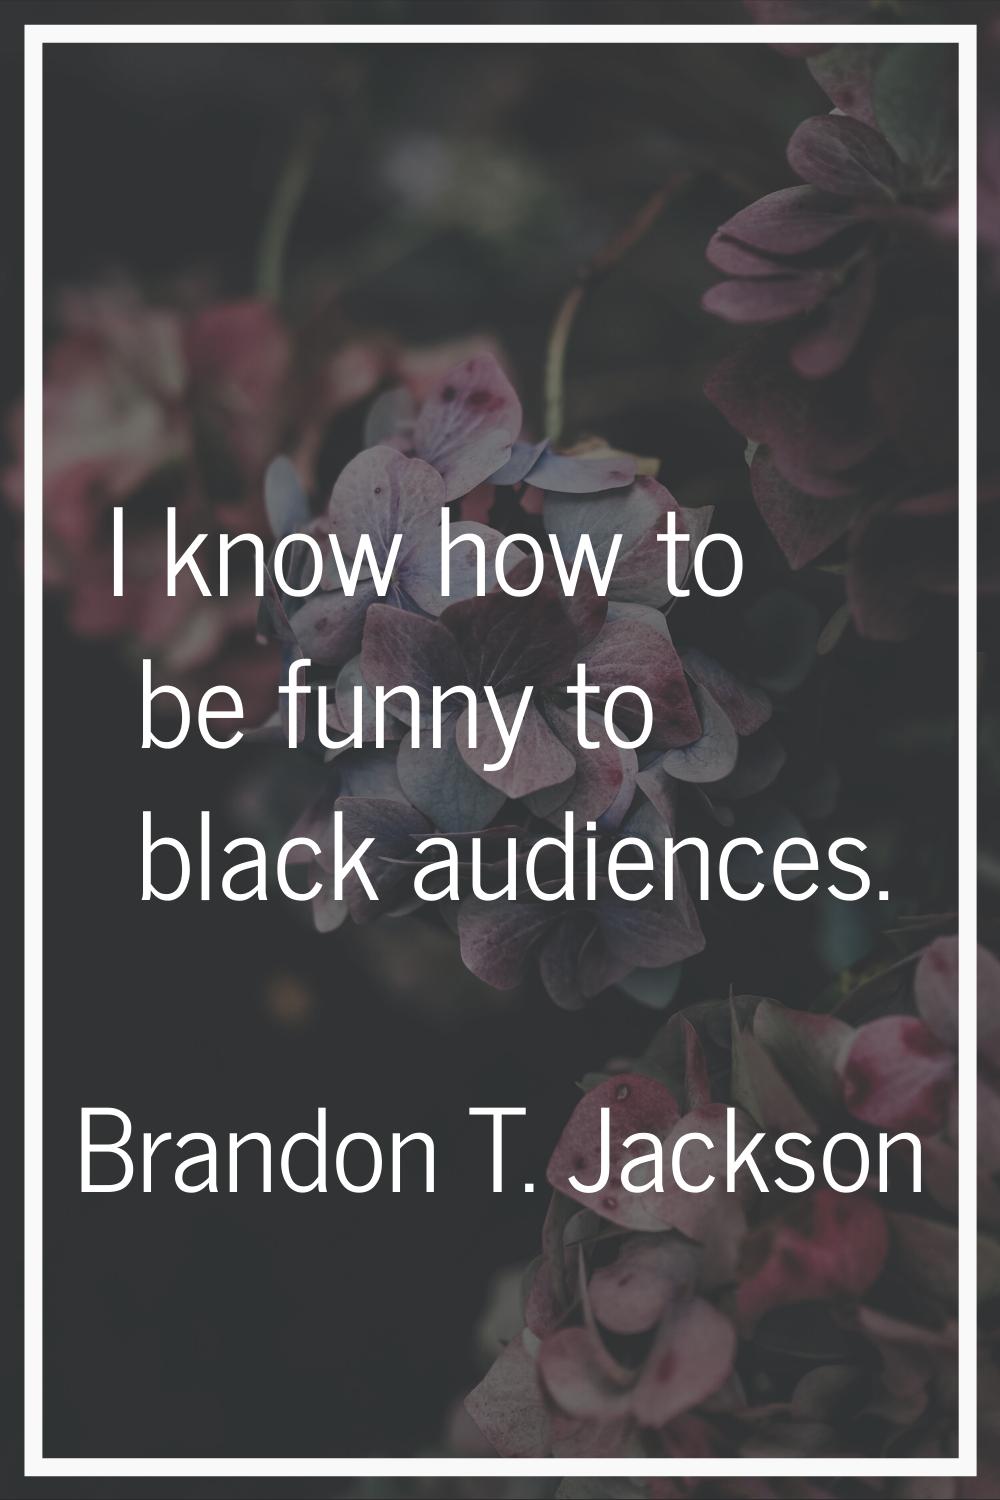 I know how to be funny to black audiences.